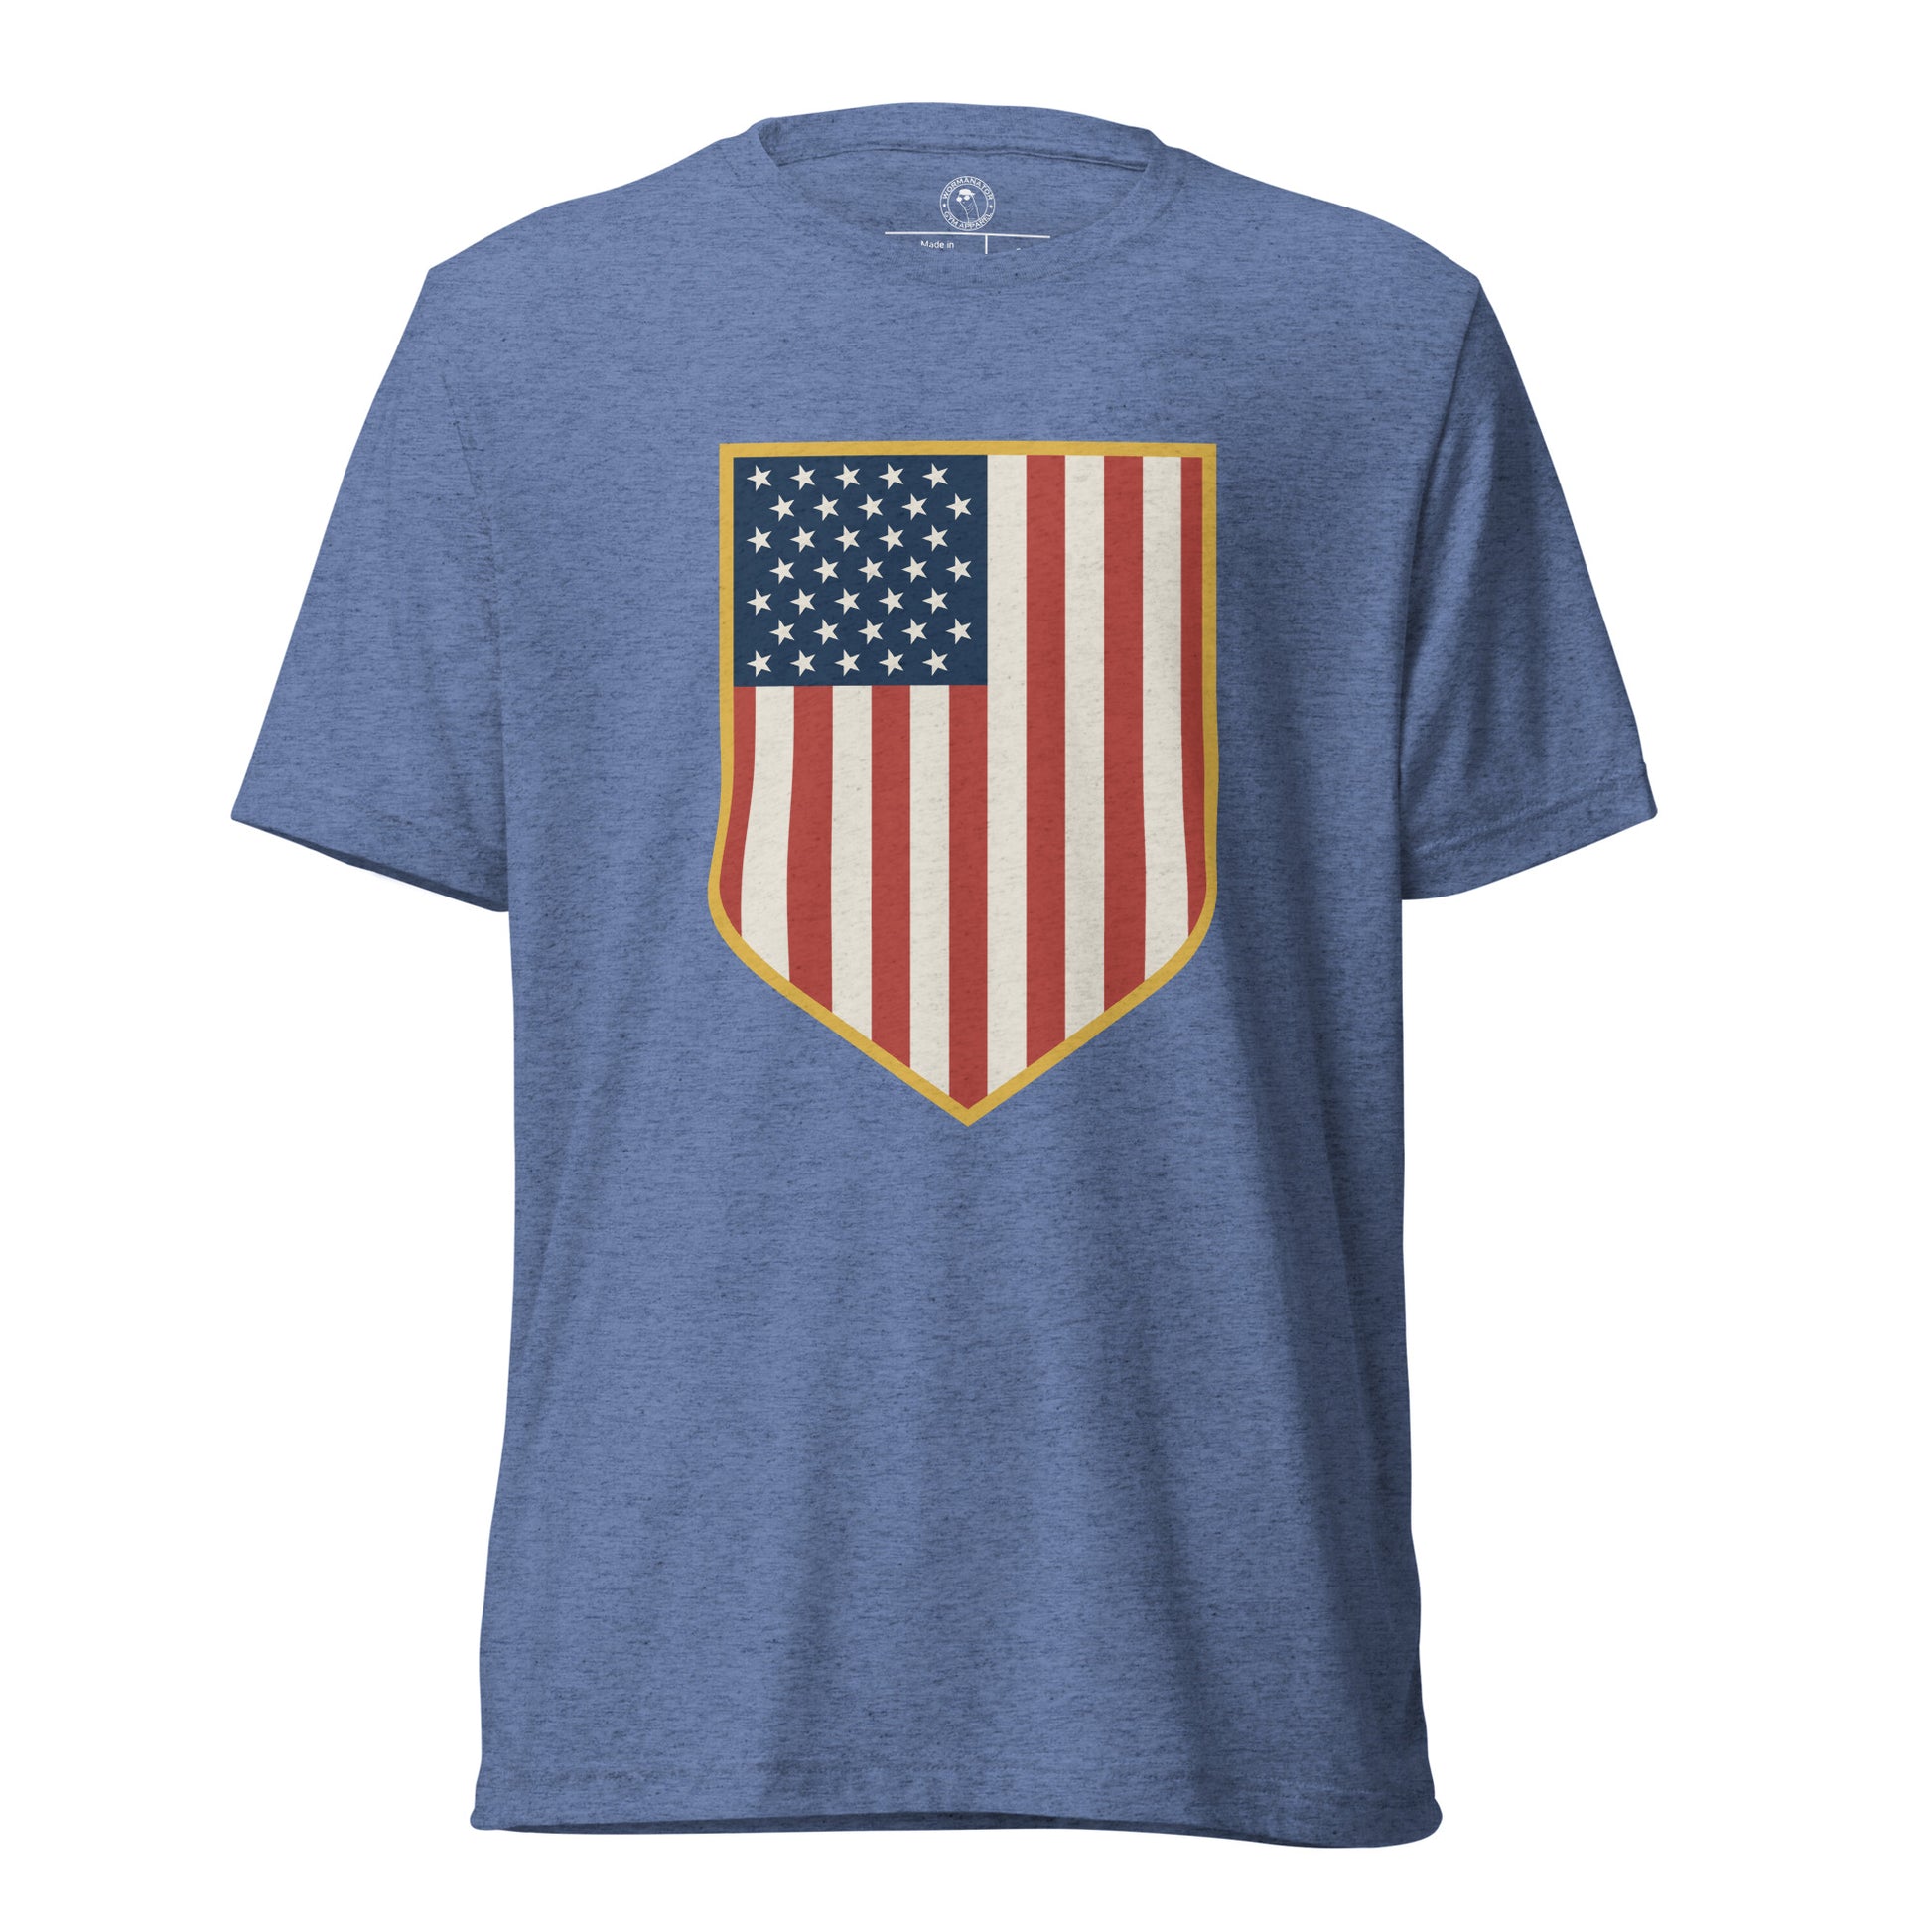 General Patton Shirt in Blue Triblend